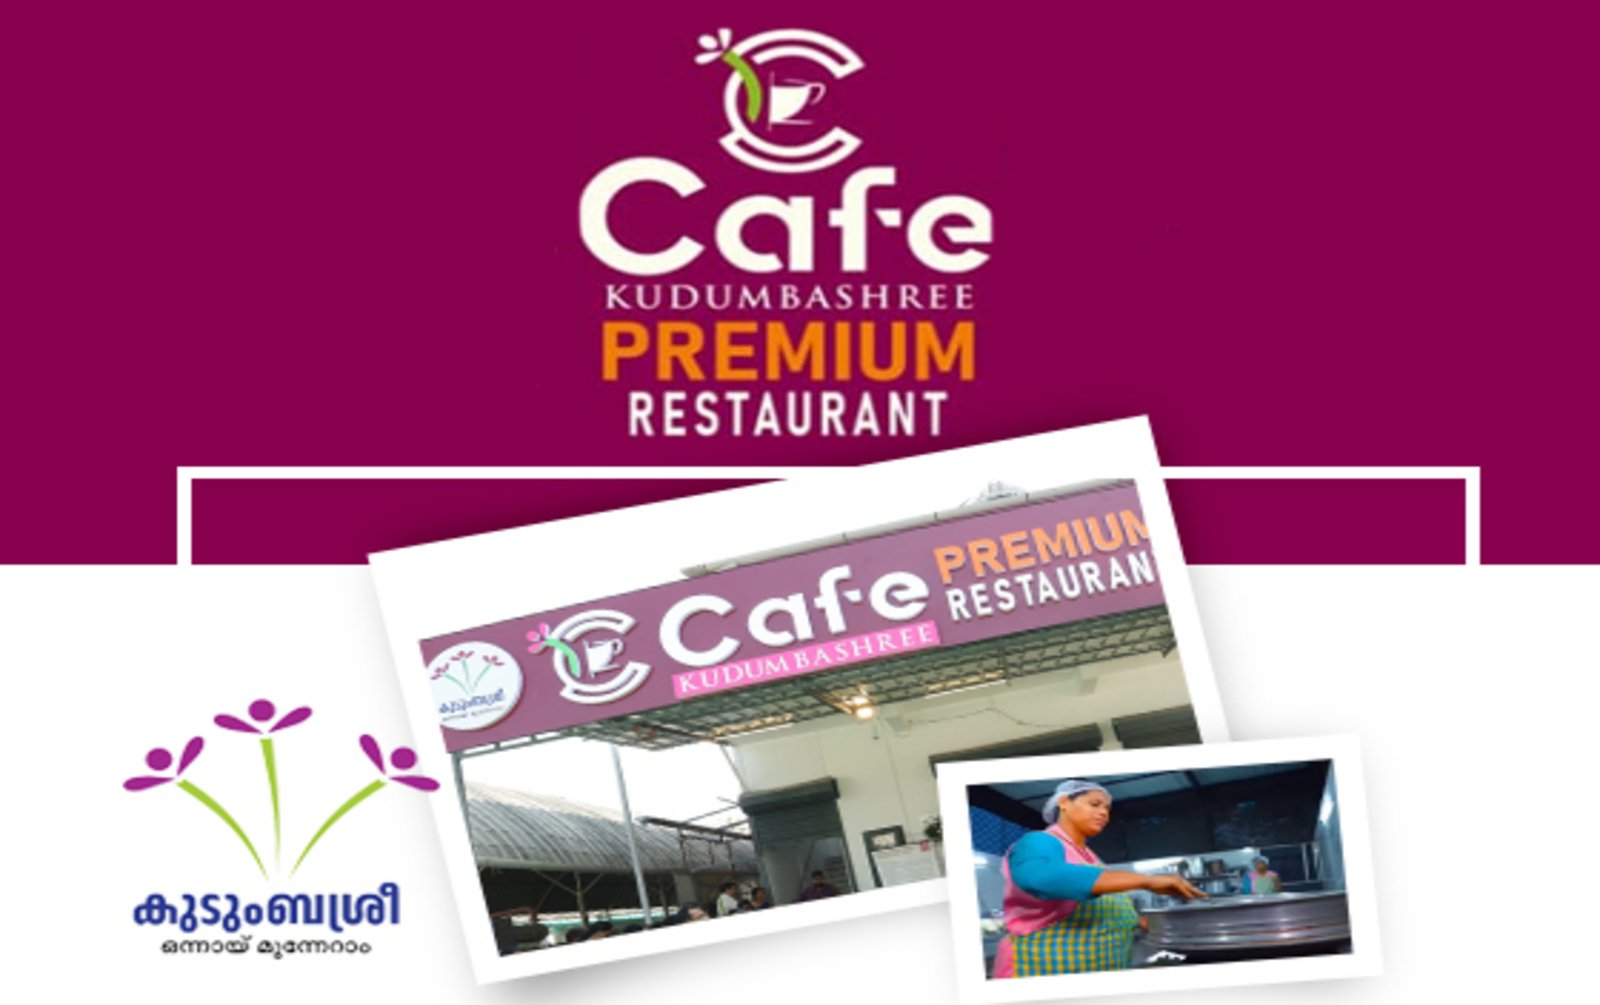 Cafe Kudumbashree Premium to demonstrate excellence in the field of enterprise; At first cafe Angamaly